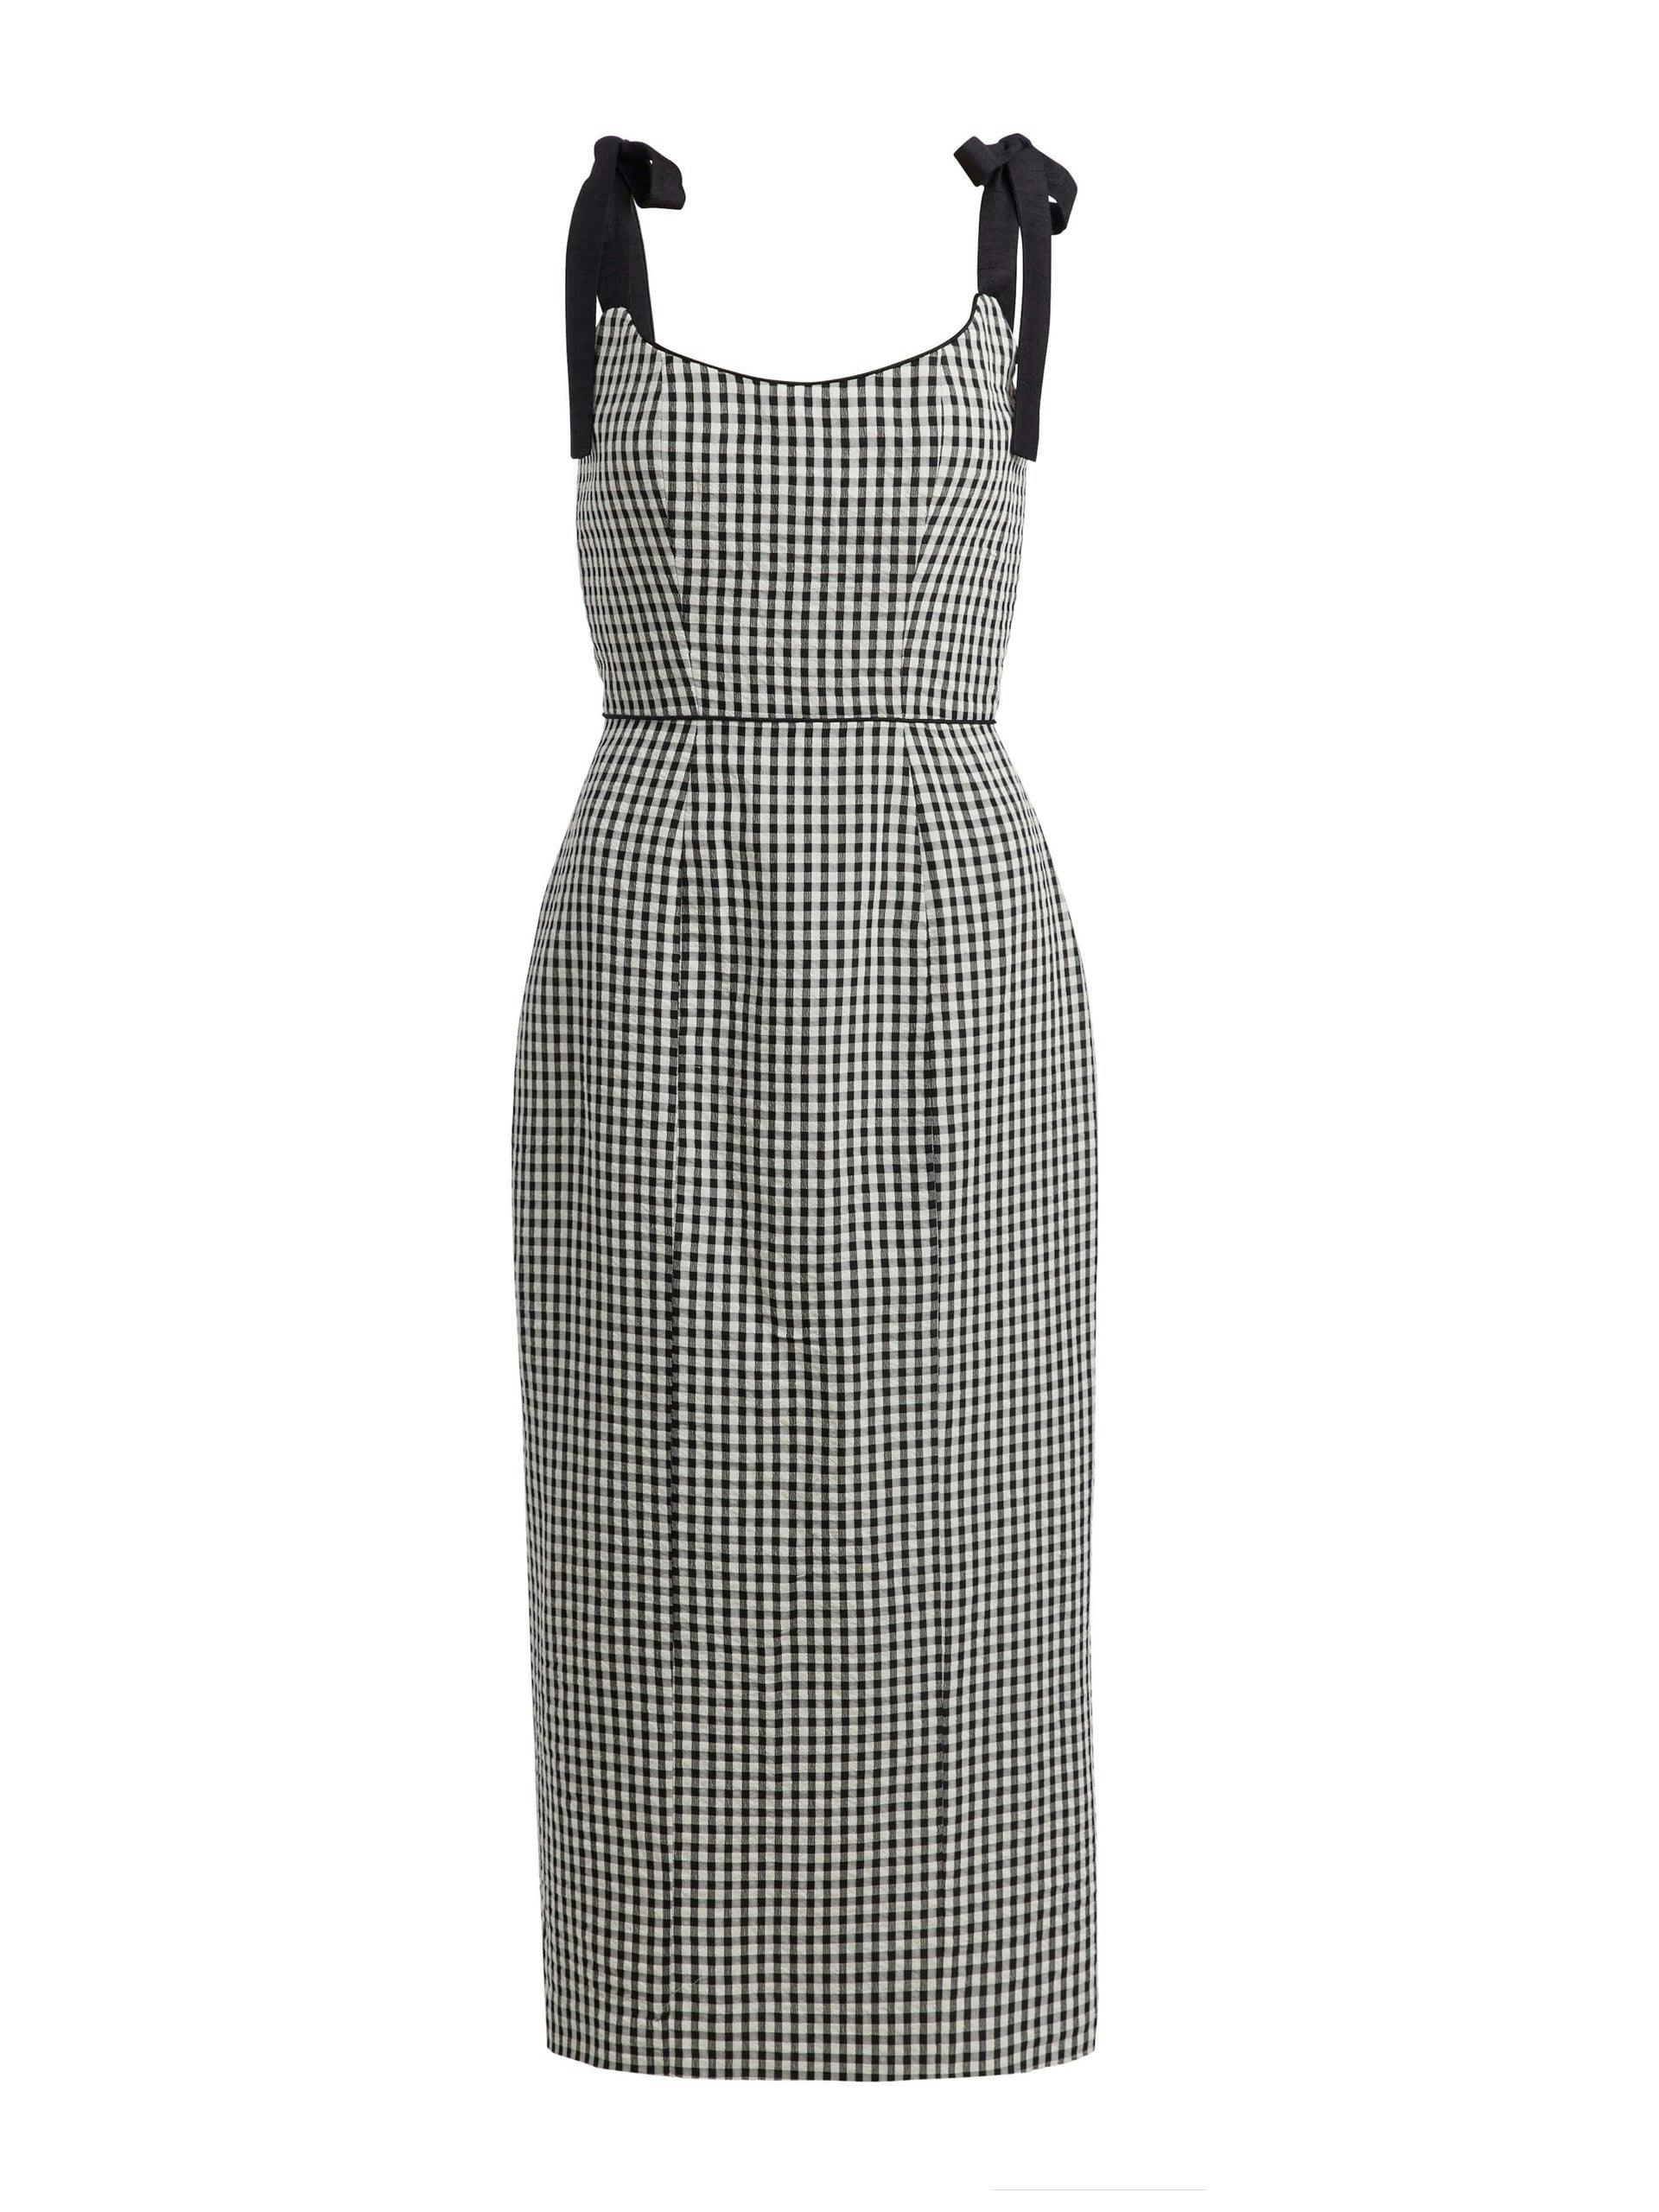 Presley black and white gingham corset dress